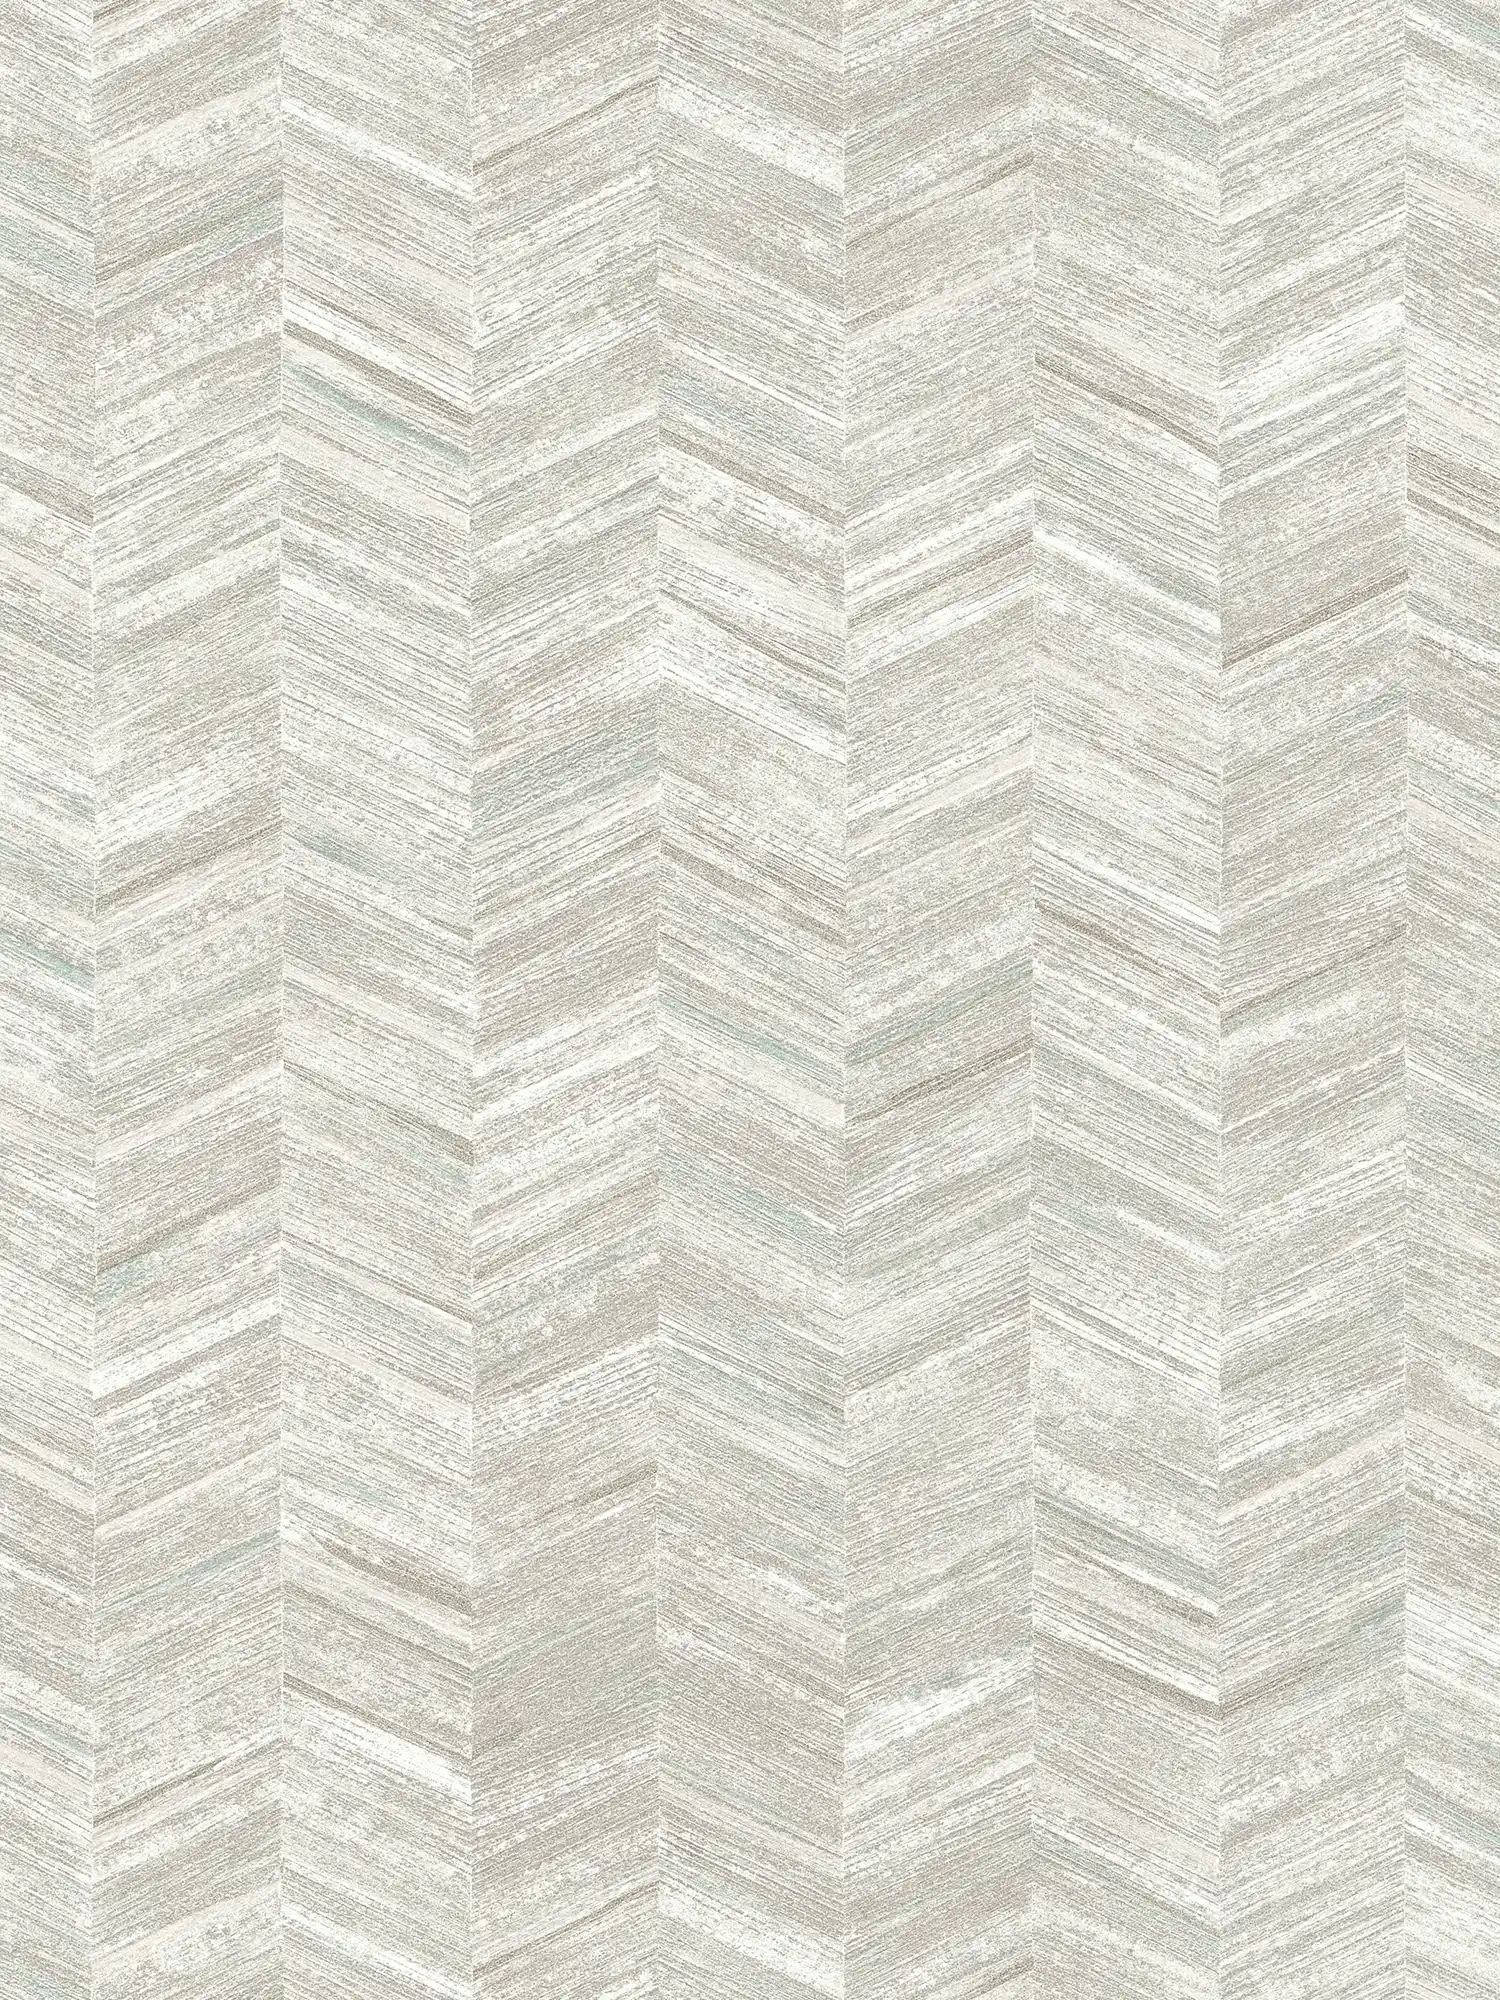 Textured wallpaper non-woven with wood effect & herringbone pattern - grey, white
